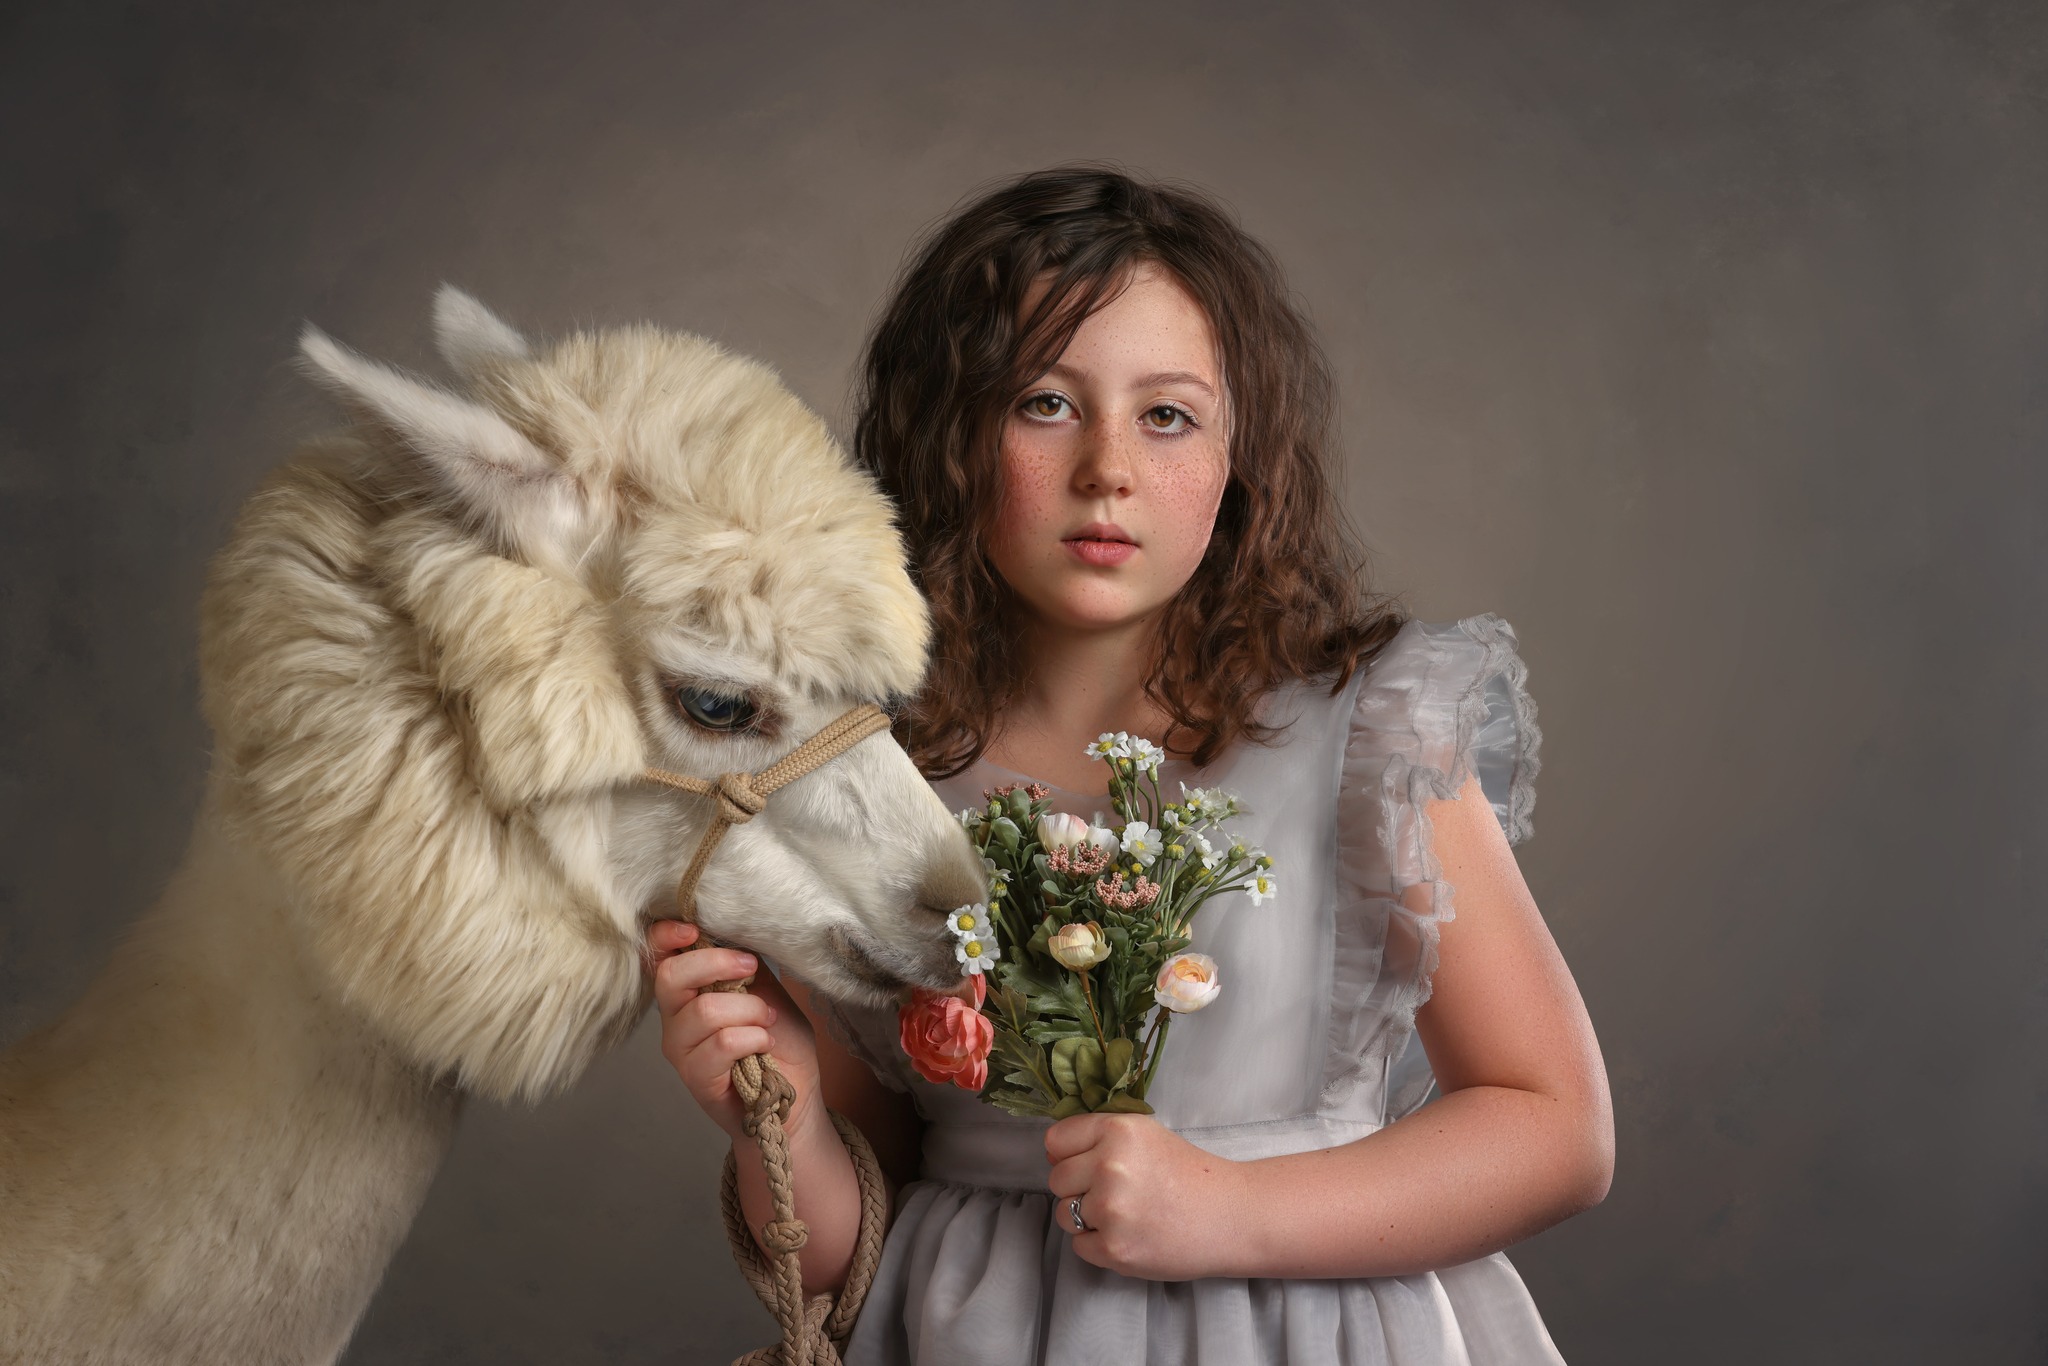 Alpaca eating flowers being held by a girl in a grey dress, in the style of a fine art portrait